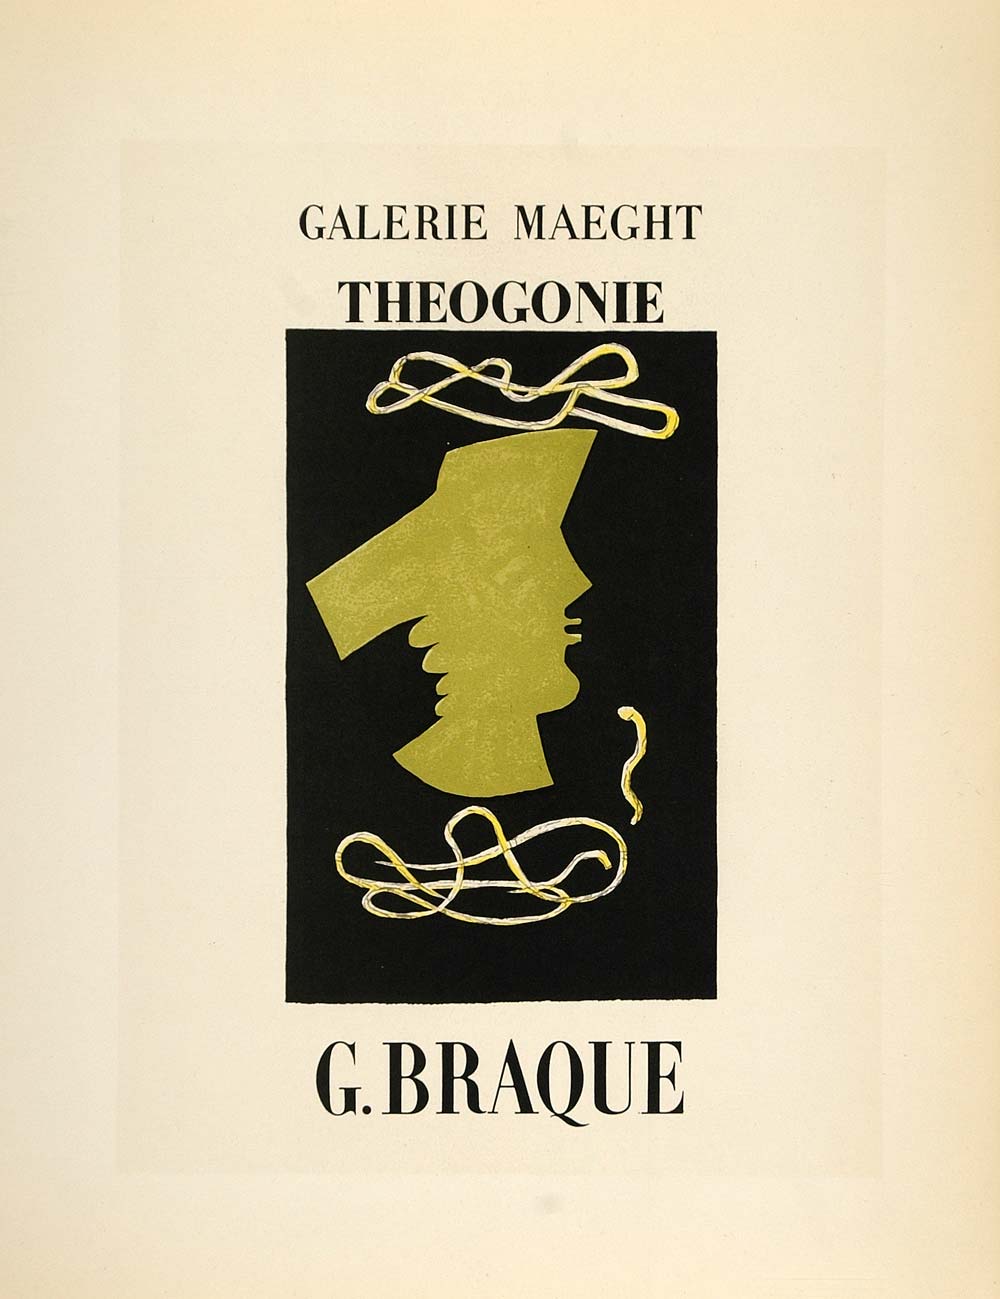 1959 Lithograph Georges Braque Poster Art Theogonie Galerie Maeght Mourlot